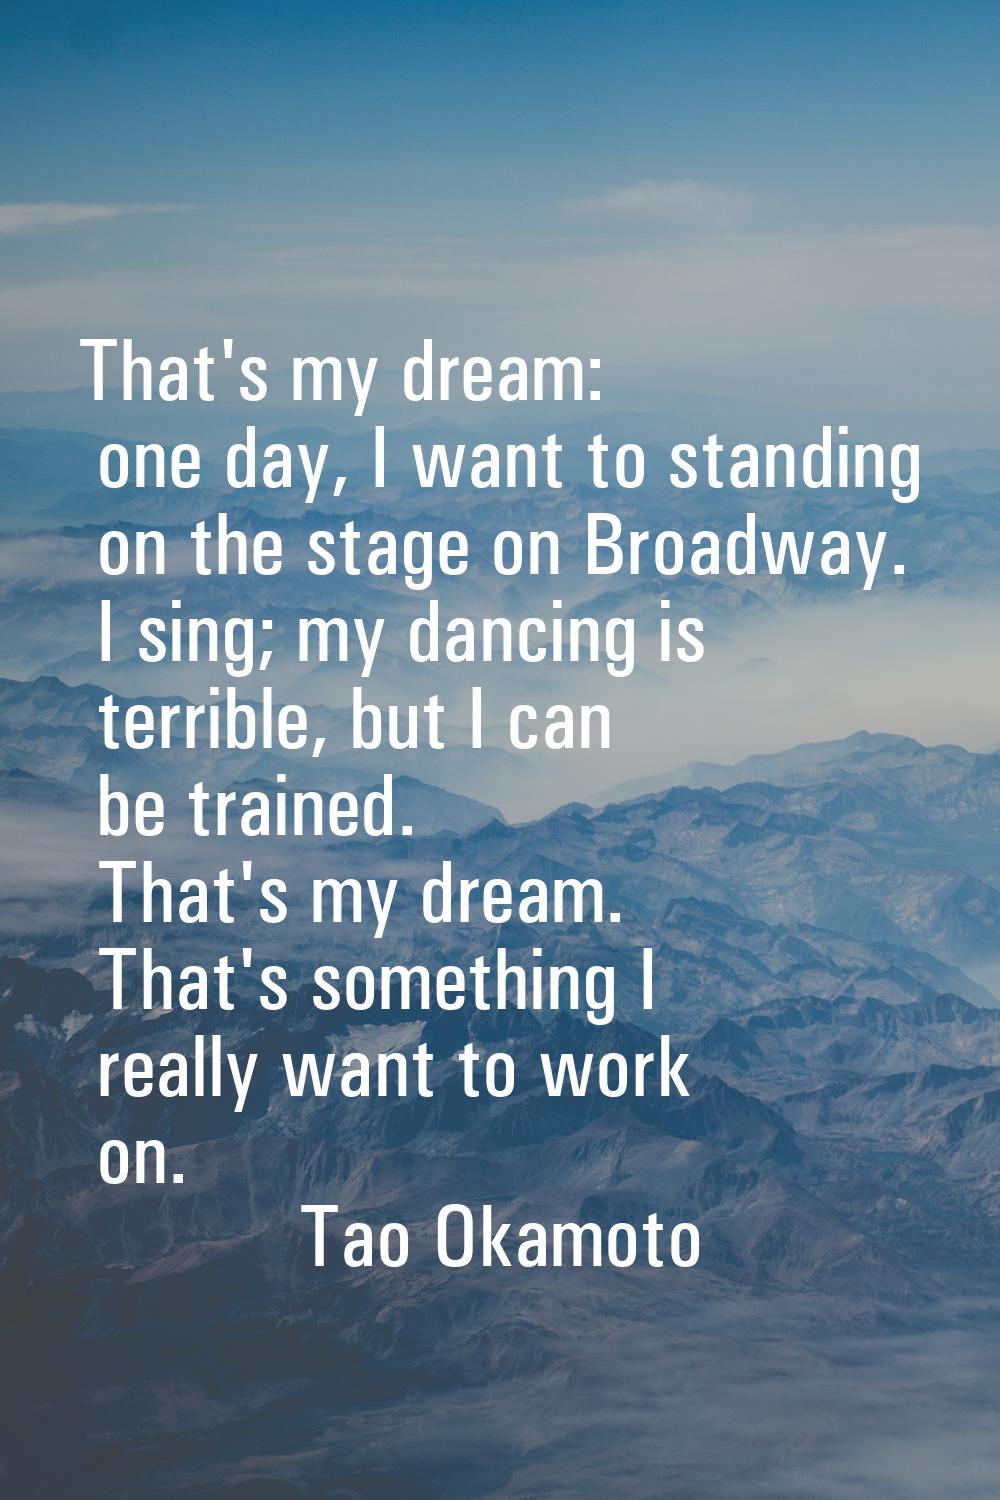 That's my dream: one day, I want to standing on the stage on Broadway. I sing; my dancing is terrib